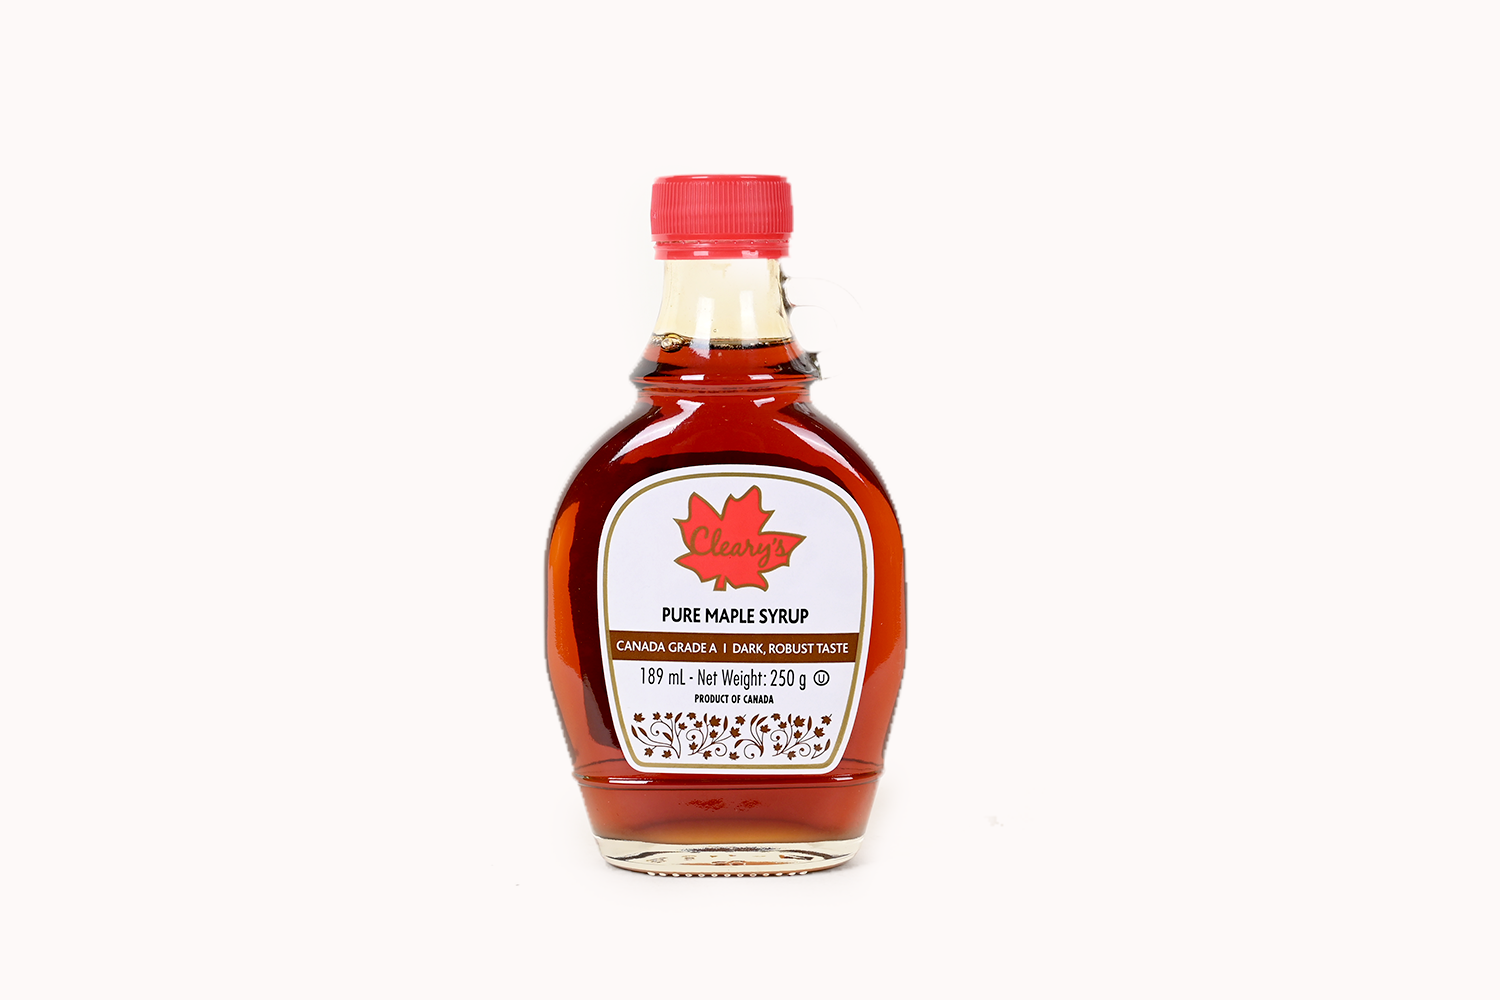 Cleary's Pure Maple Syrup